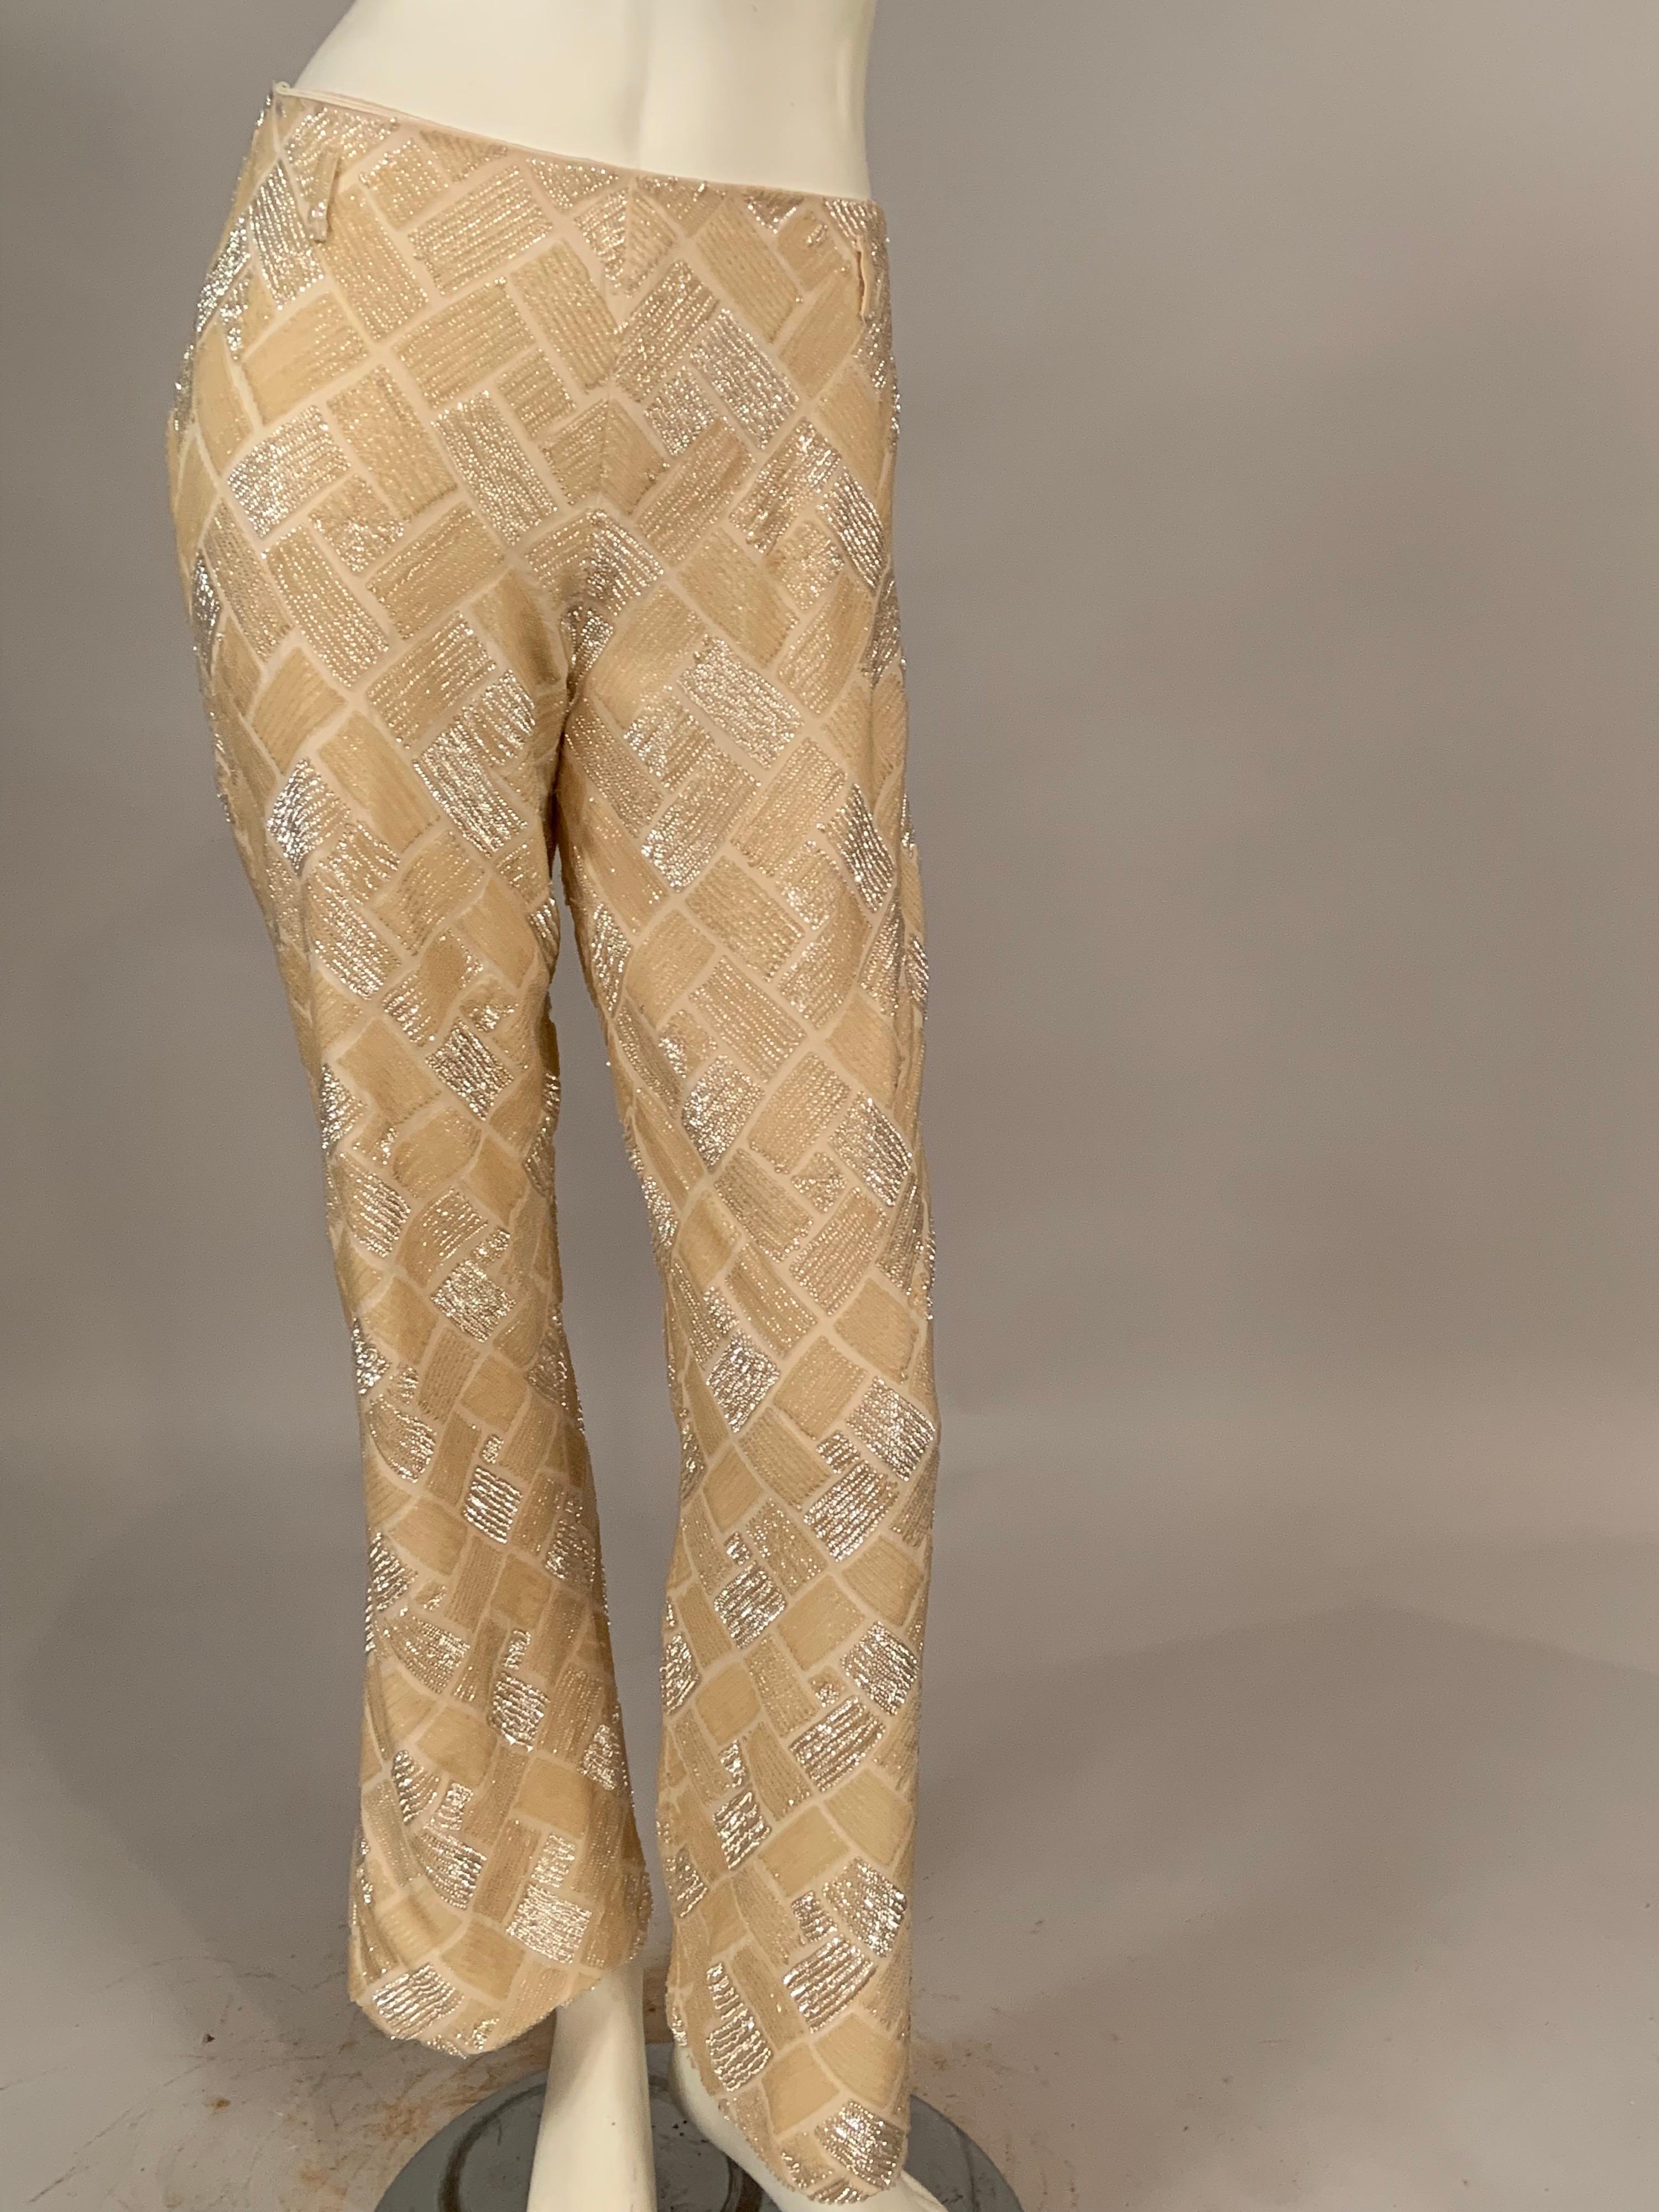 Lesage, Paris Hand Beaded Cream Silk Pants Designed by Maggie Norris Couture In Excellent Condition For Sale In New Hope, PA